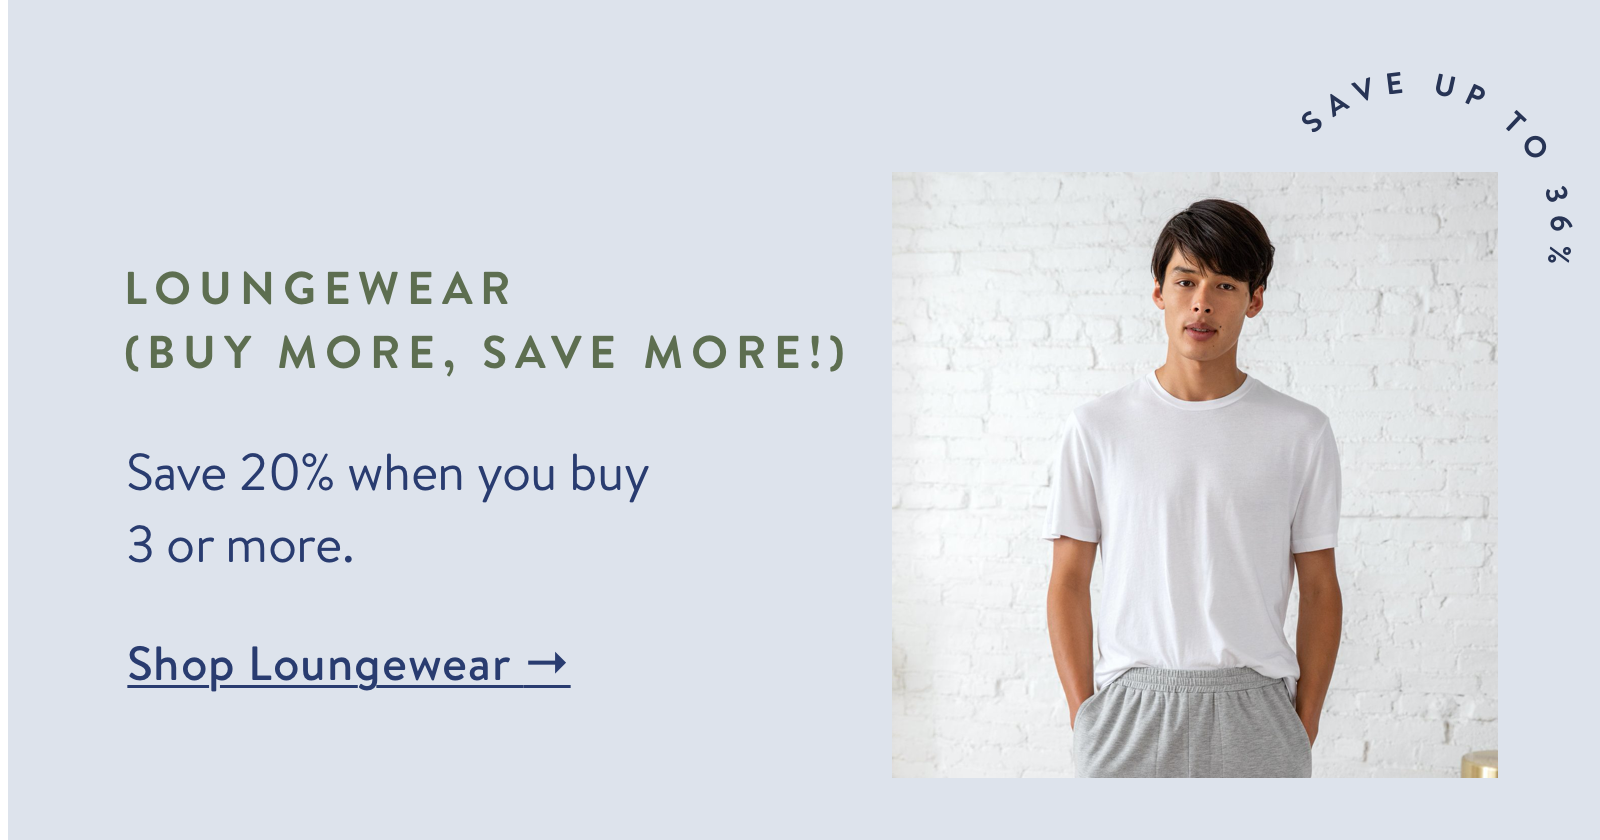 Loungewear - Save 20% when you buy 3 or more.